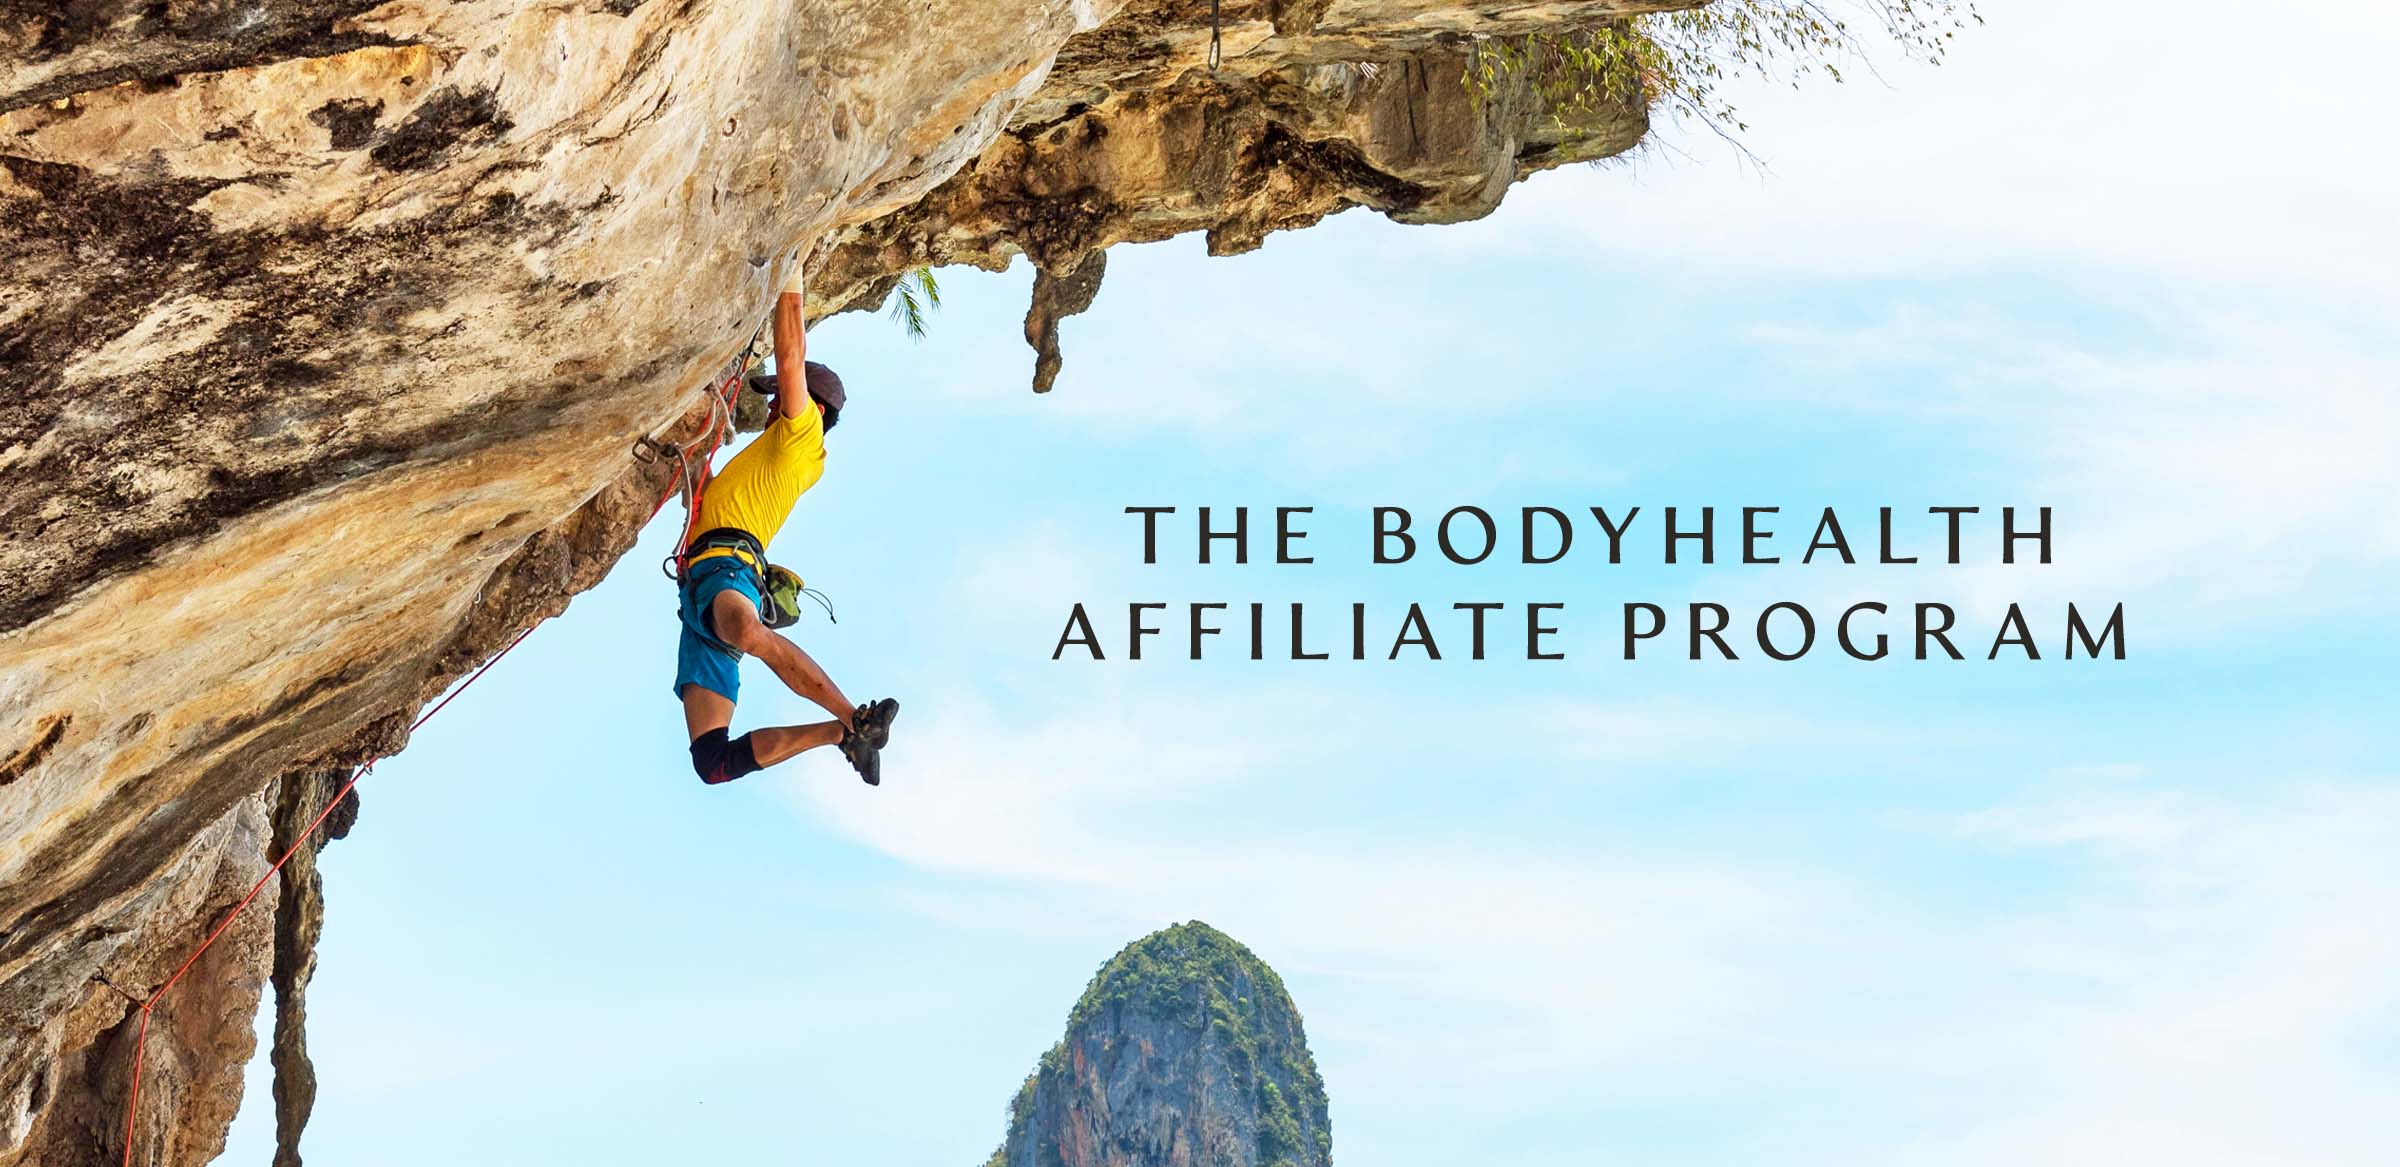 Athletic Male rock climbing and hanging from the side of a mountain.